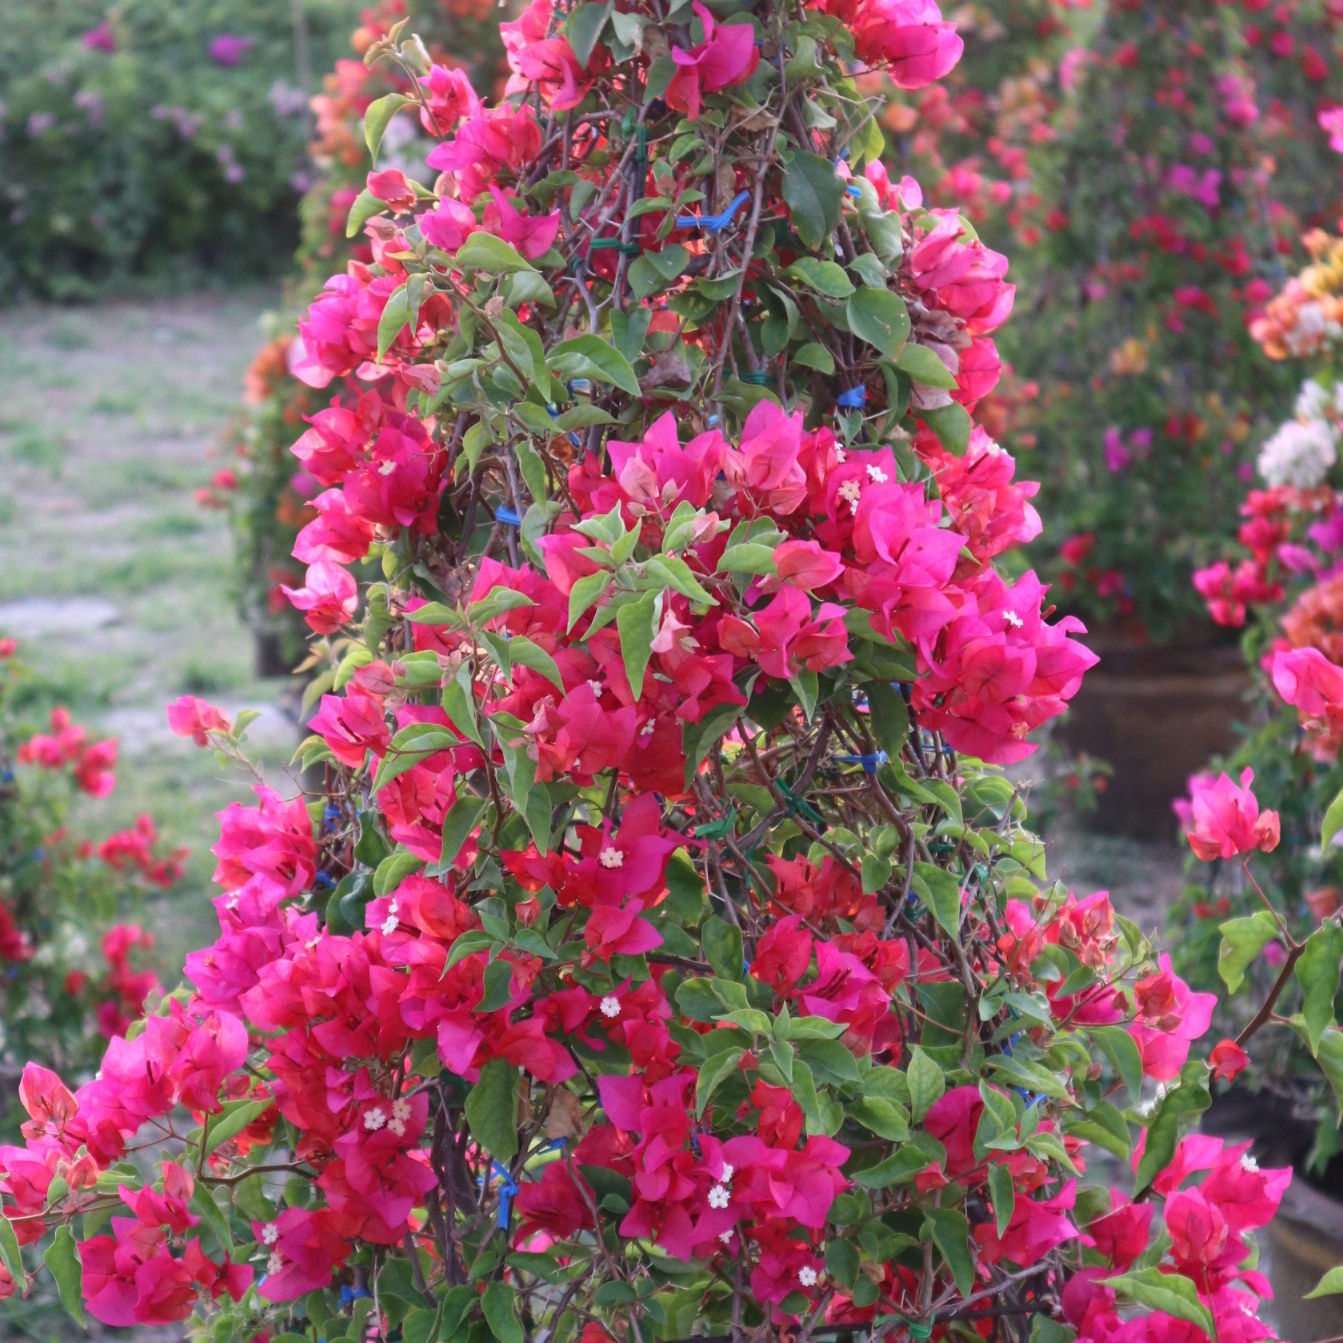 The bougainvillea garden produces a number to sell in the country as well as export to foreign countries.